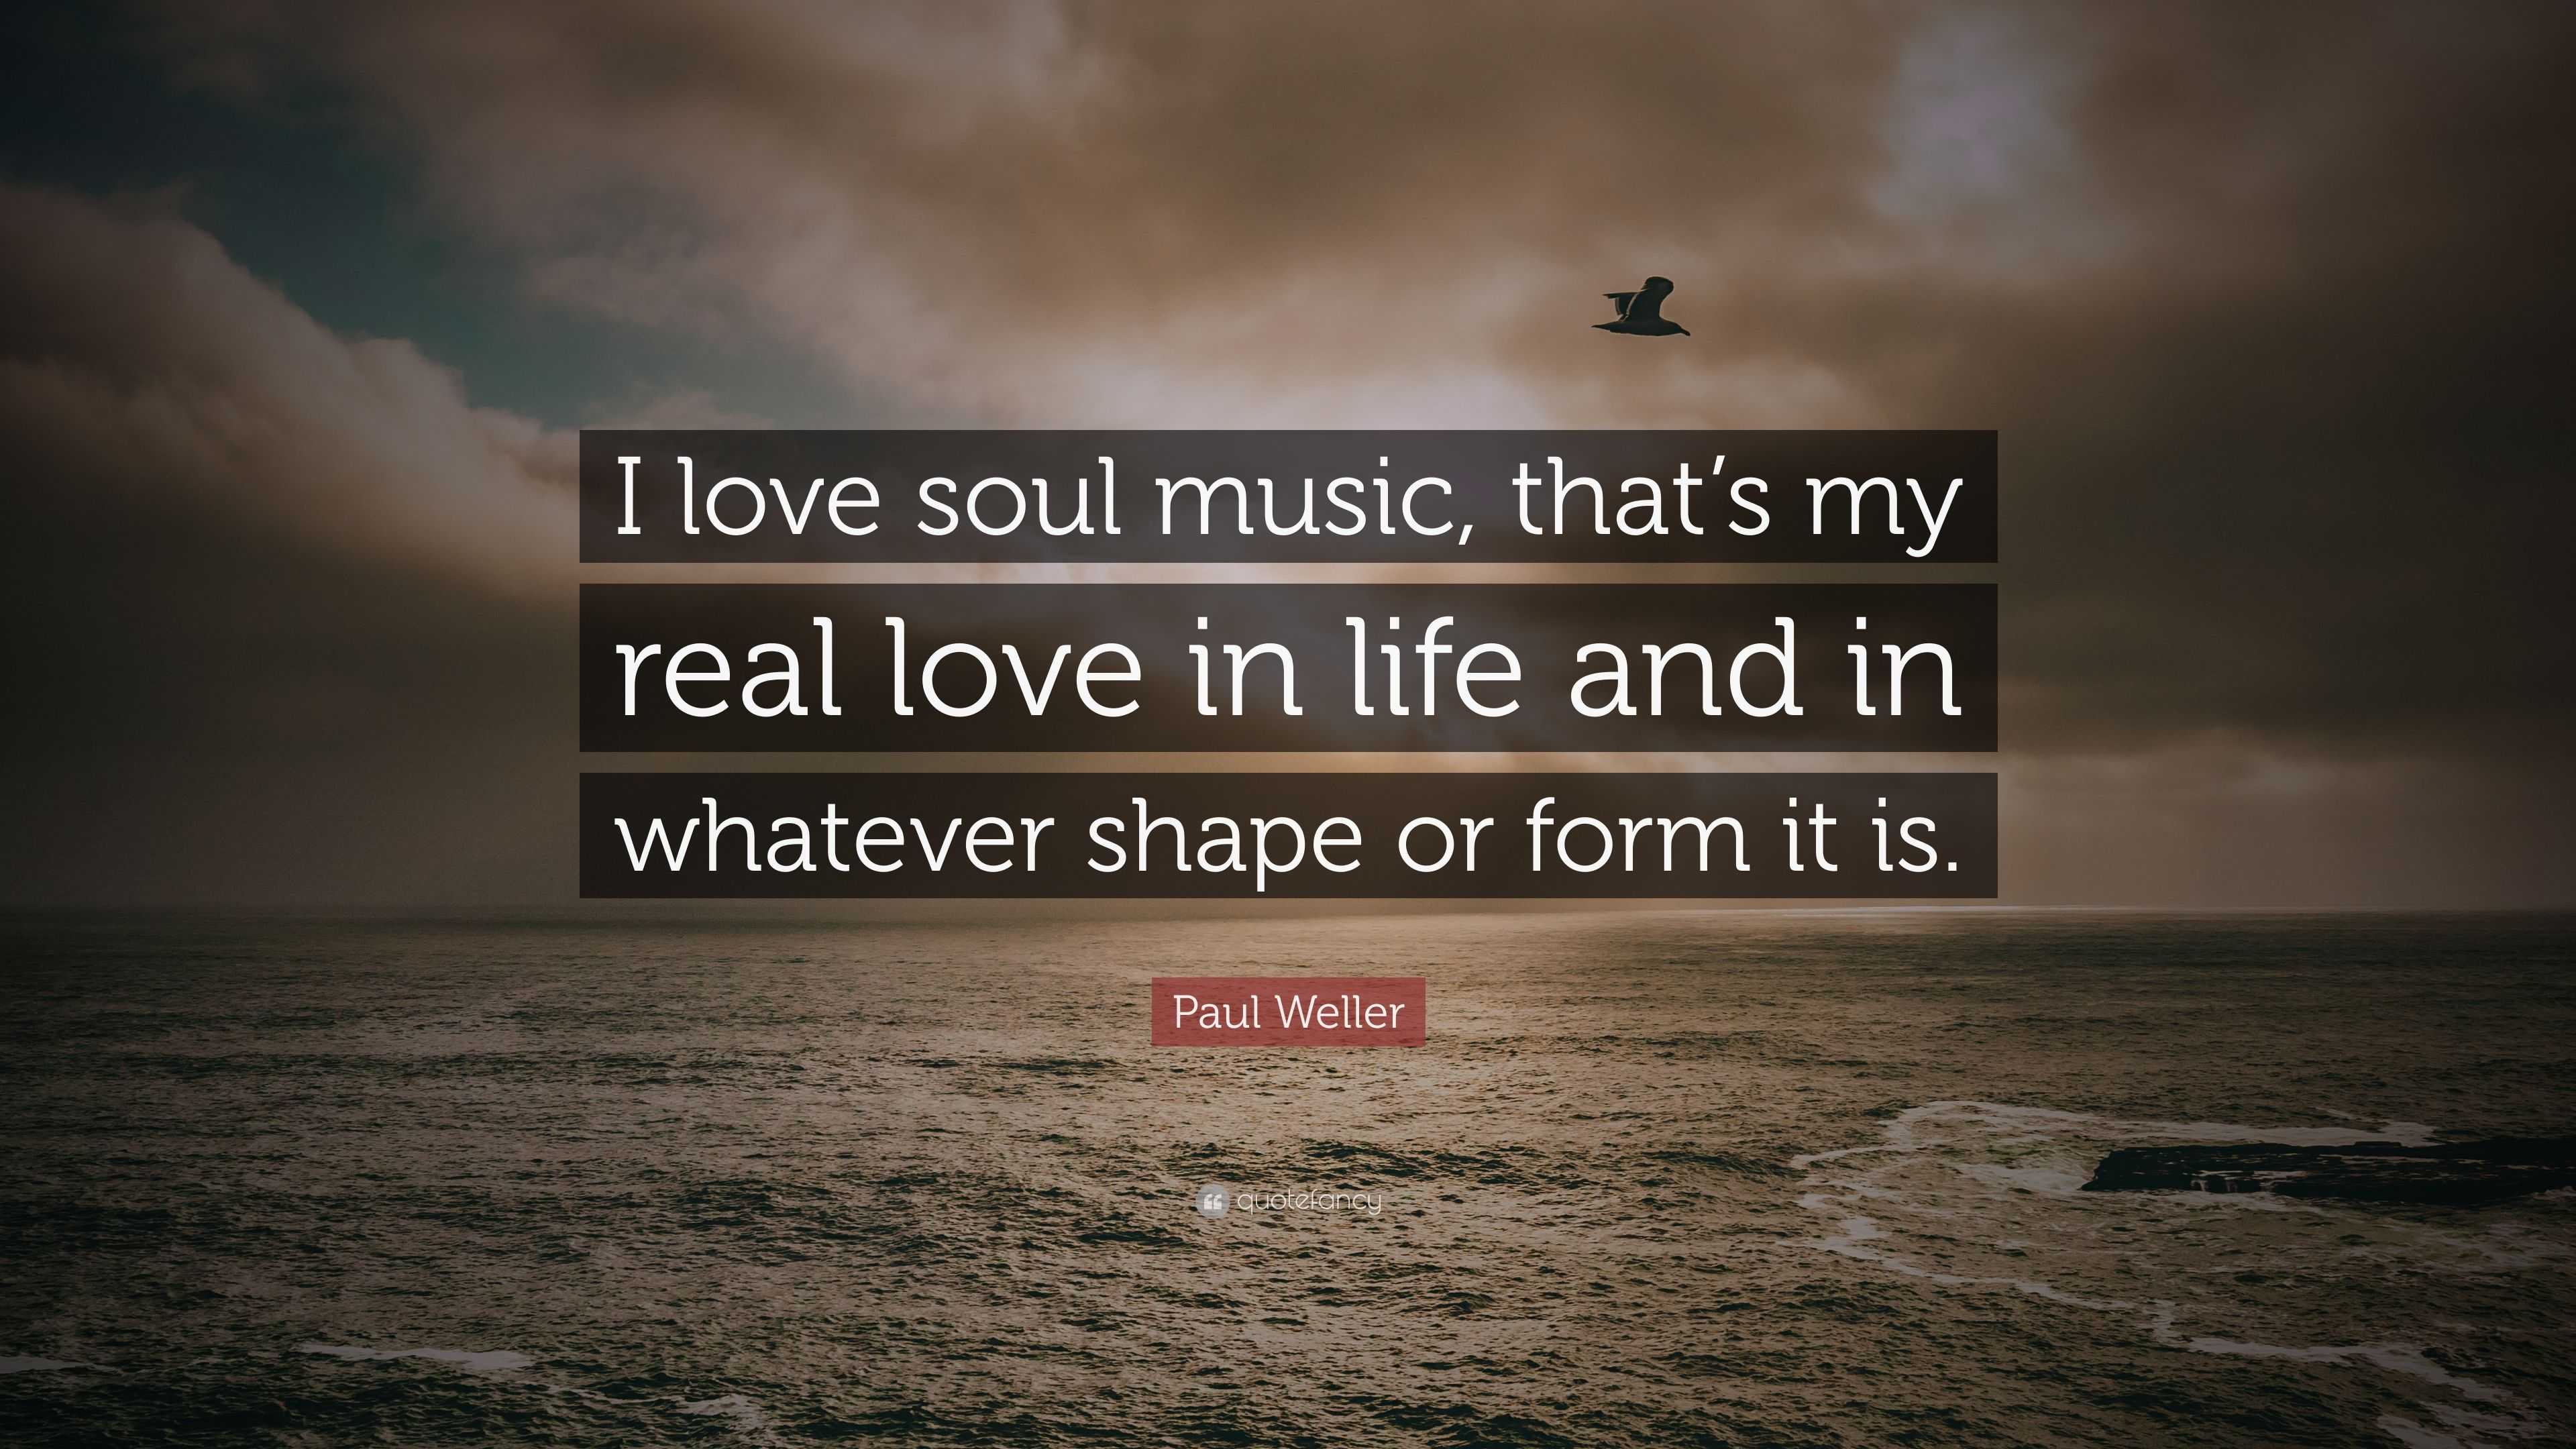 Paul Weller Quote: "I love soul music, that's my real love in life and in whatever shape or form ...